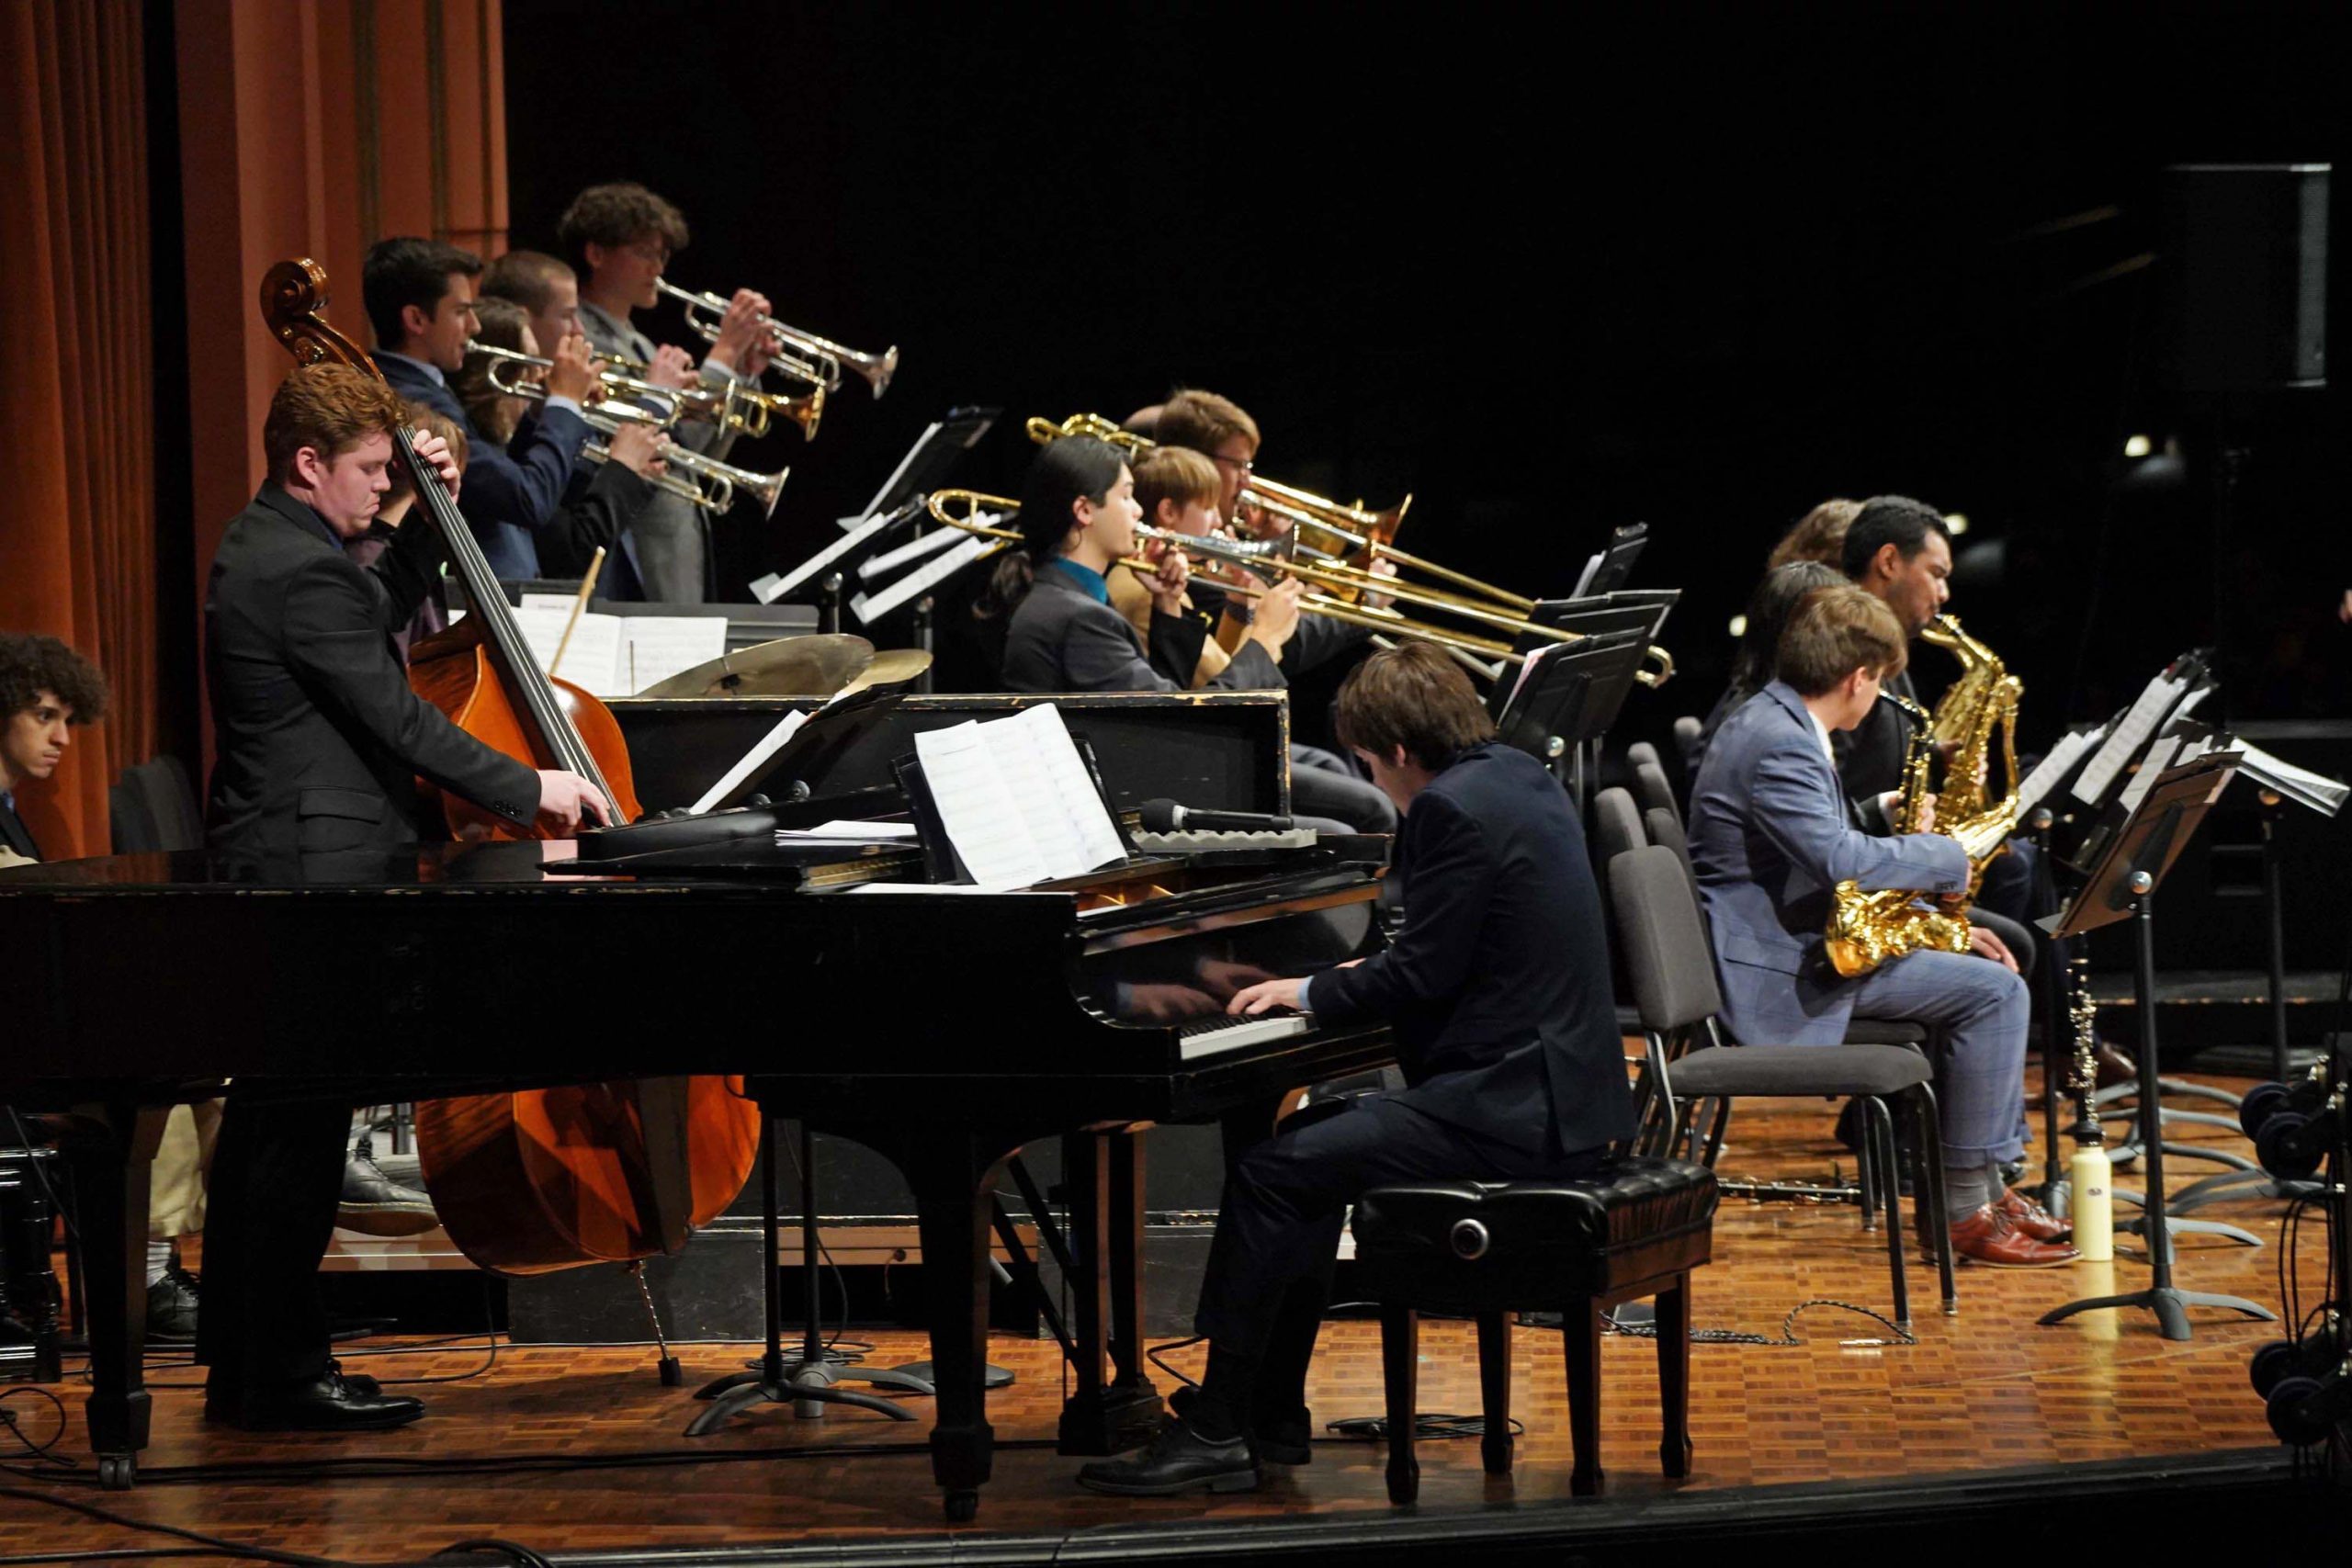 Pianist, bassist, and three rows of brass and wind players on stage at a Jazz Lab Ensemble performance